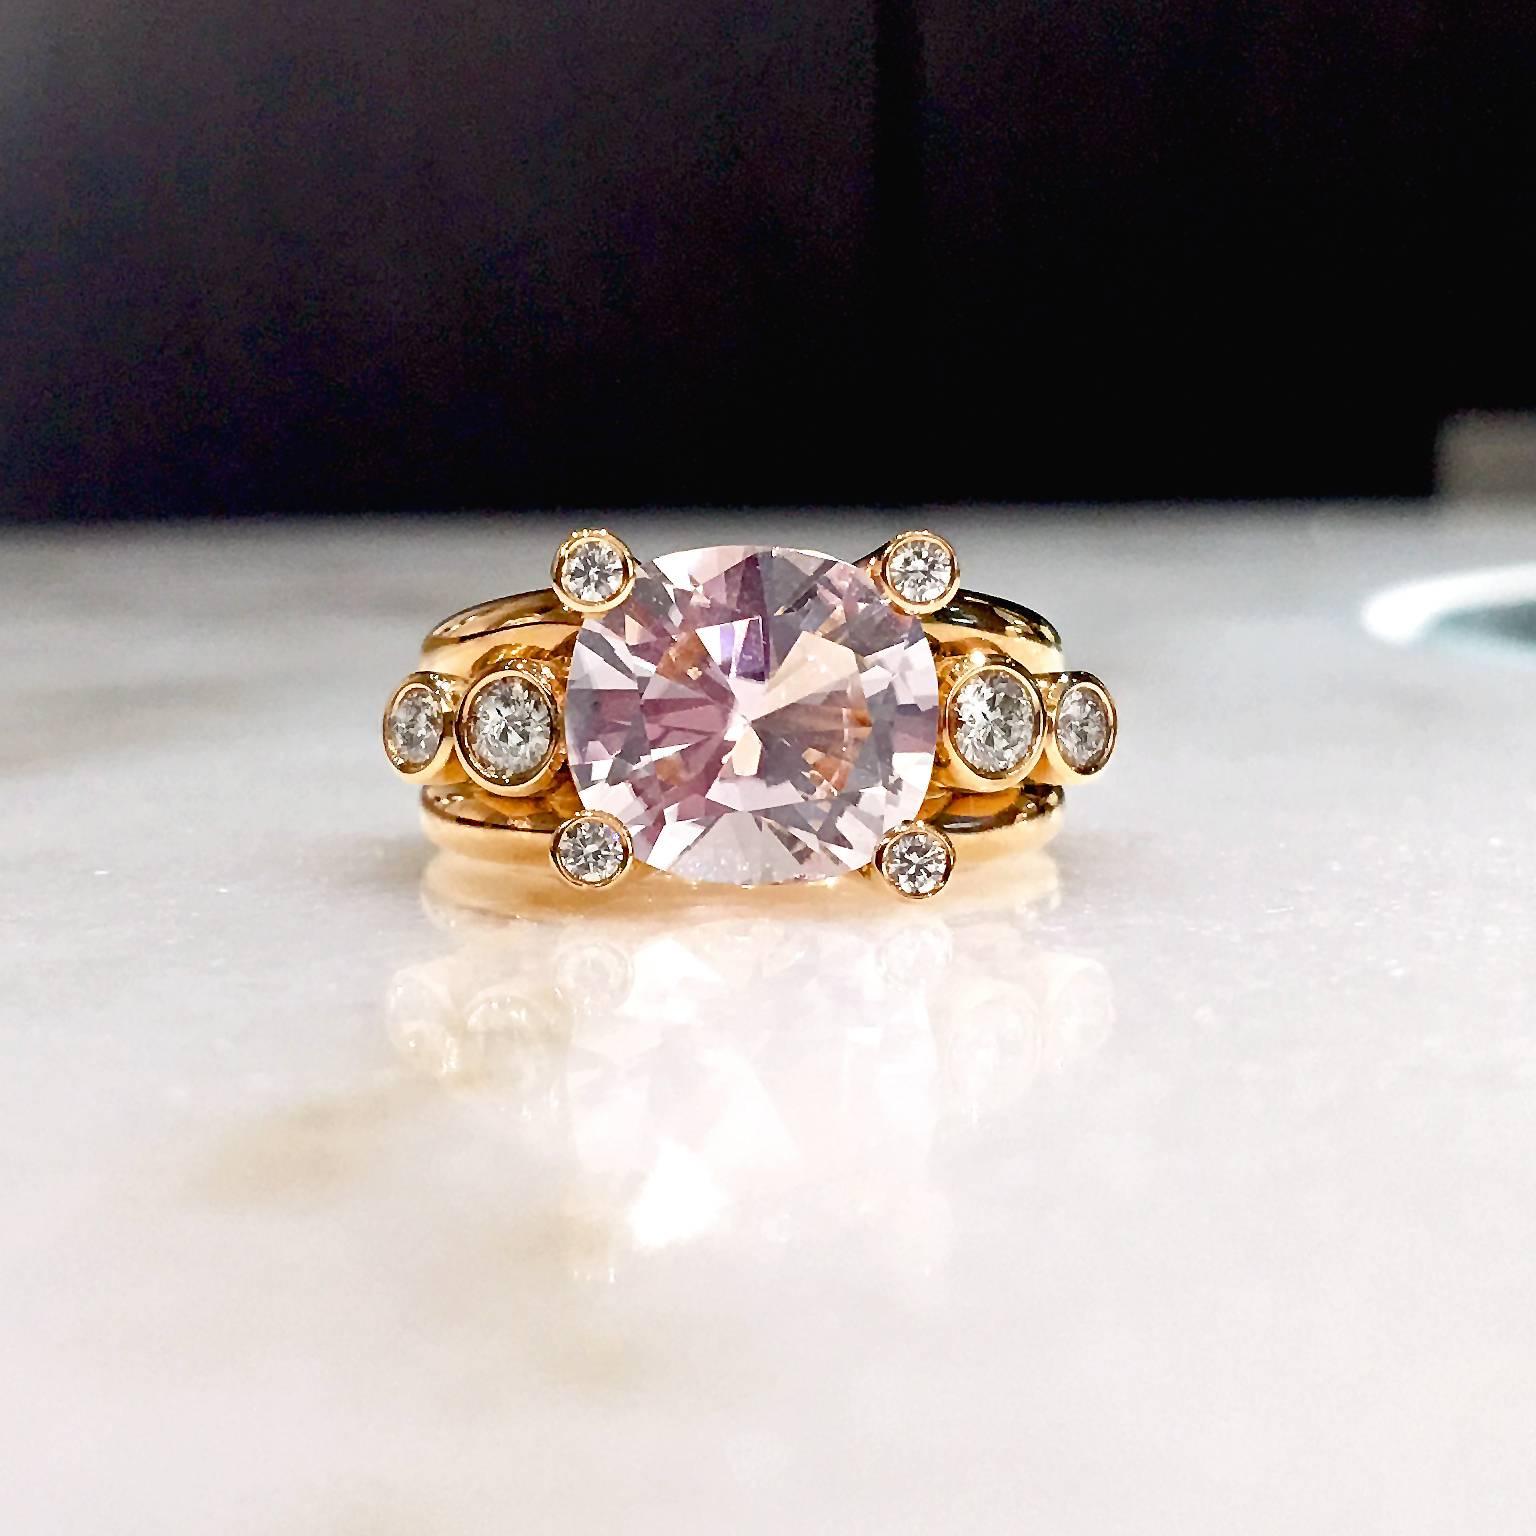 One-of-a-Kind Hollywood Ring handcrafted in Germany by master metalsmith Erich Zimmermann in 18k rose gold, showcasing a bezel-set 5.06 carat cushion-cut rose kunzite accented by eight tube bezel-set, assorted sized round brilliant-cut white